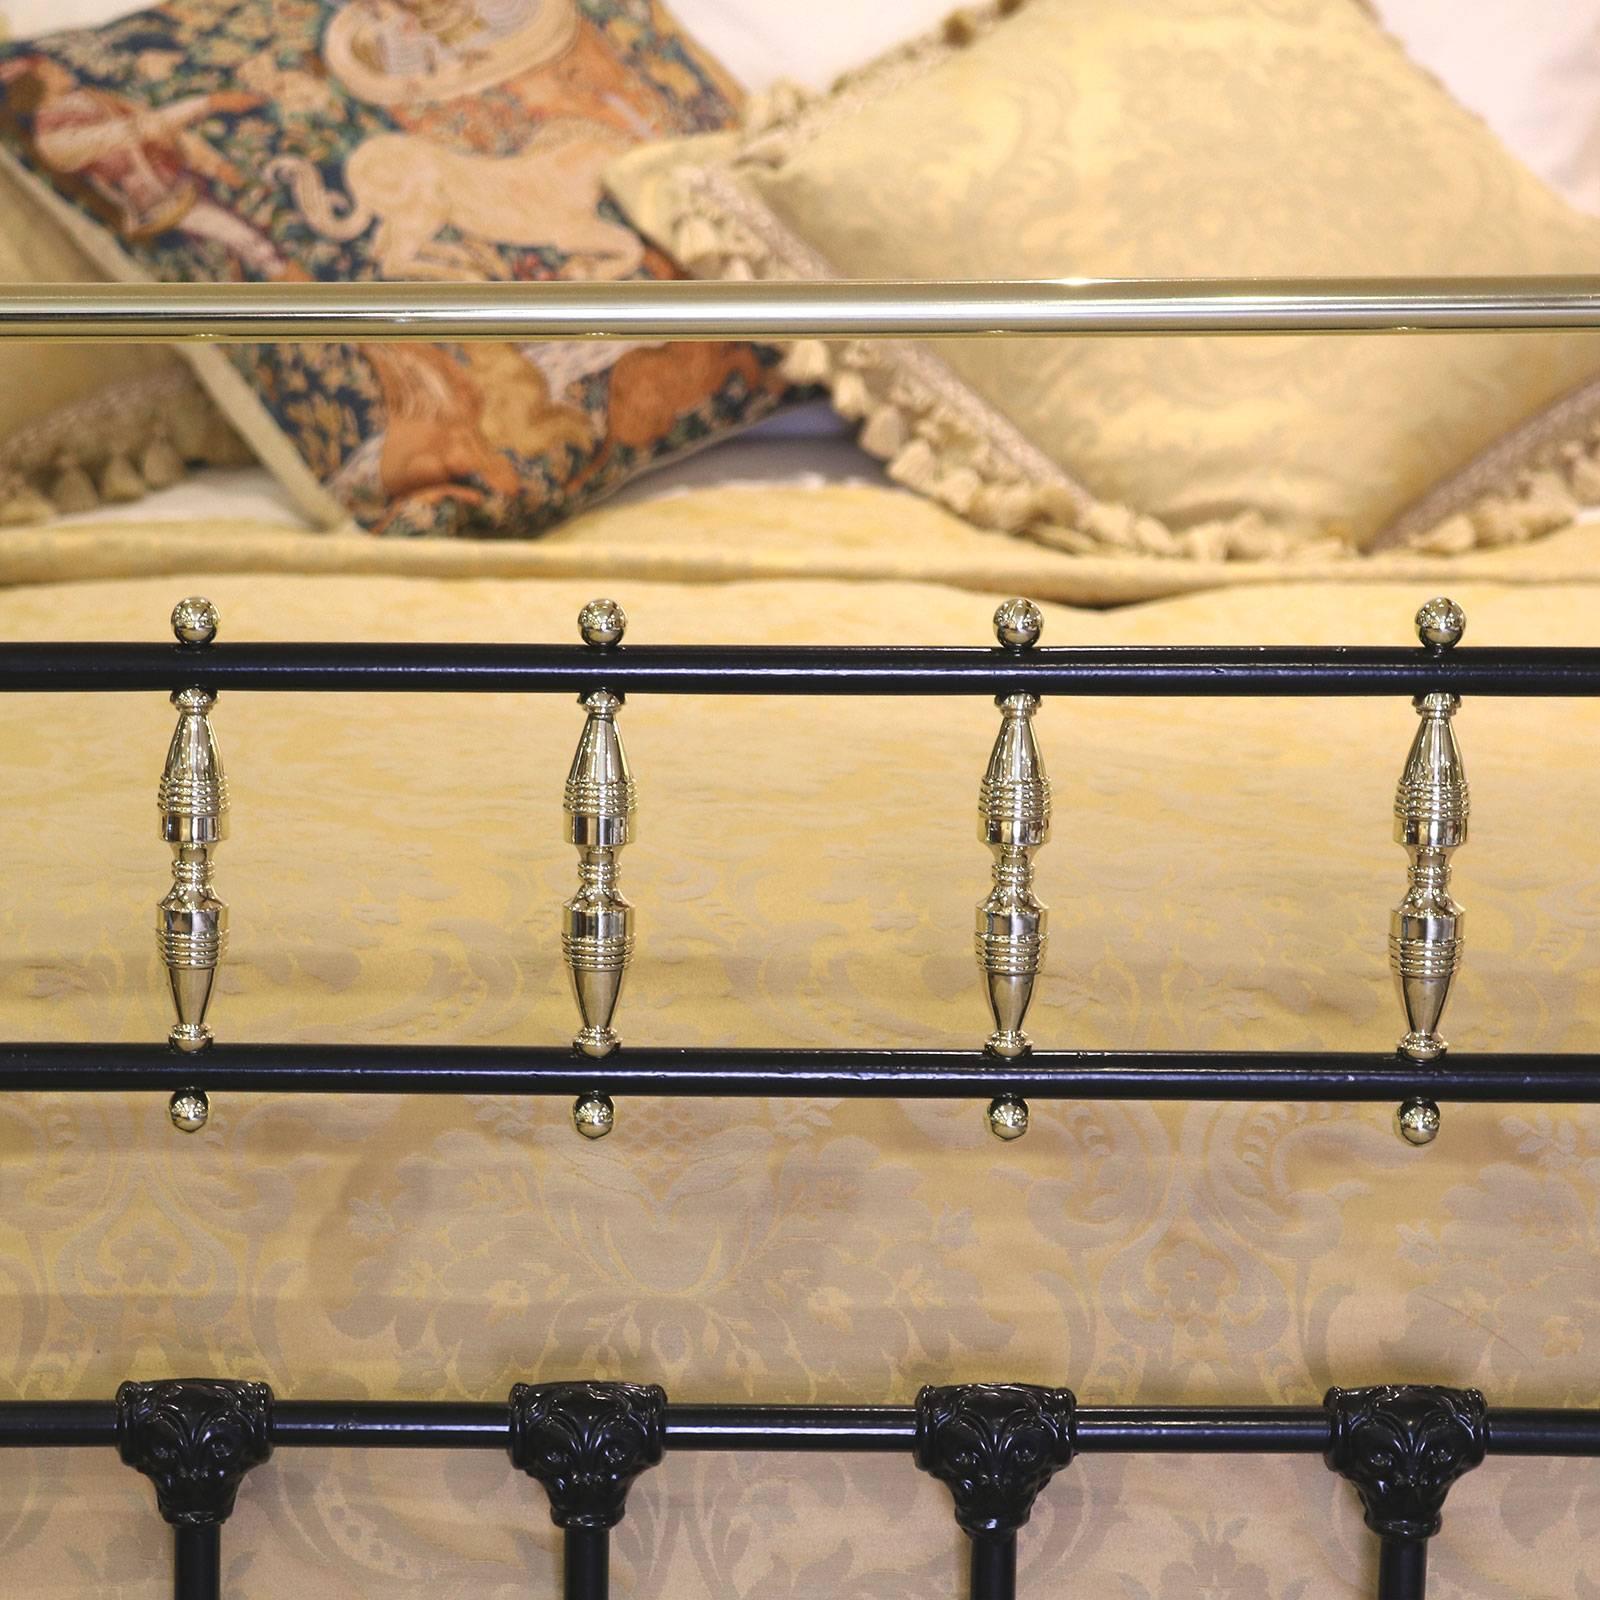 Brass and Iron Decorative Bed in Black MK99 1